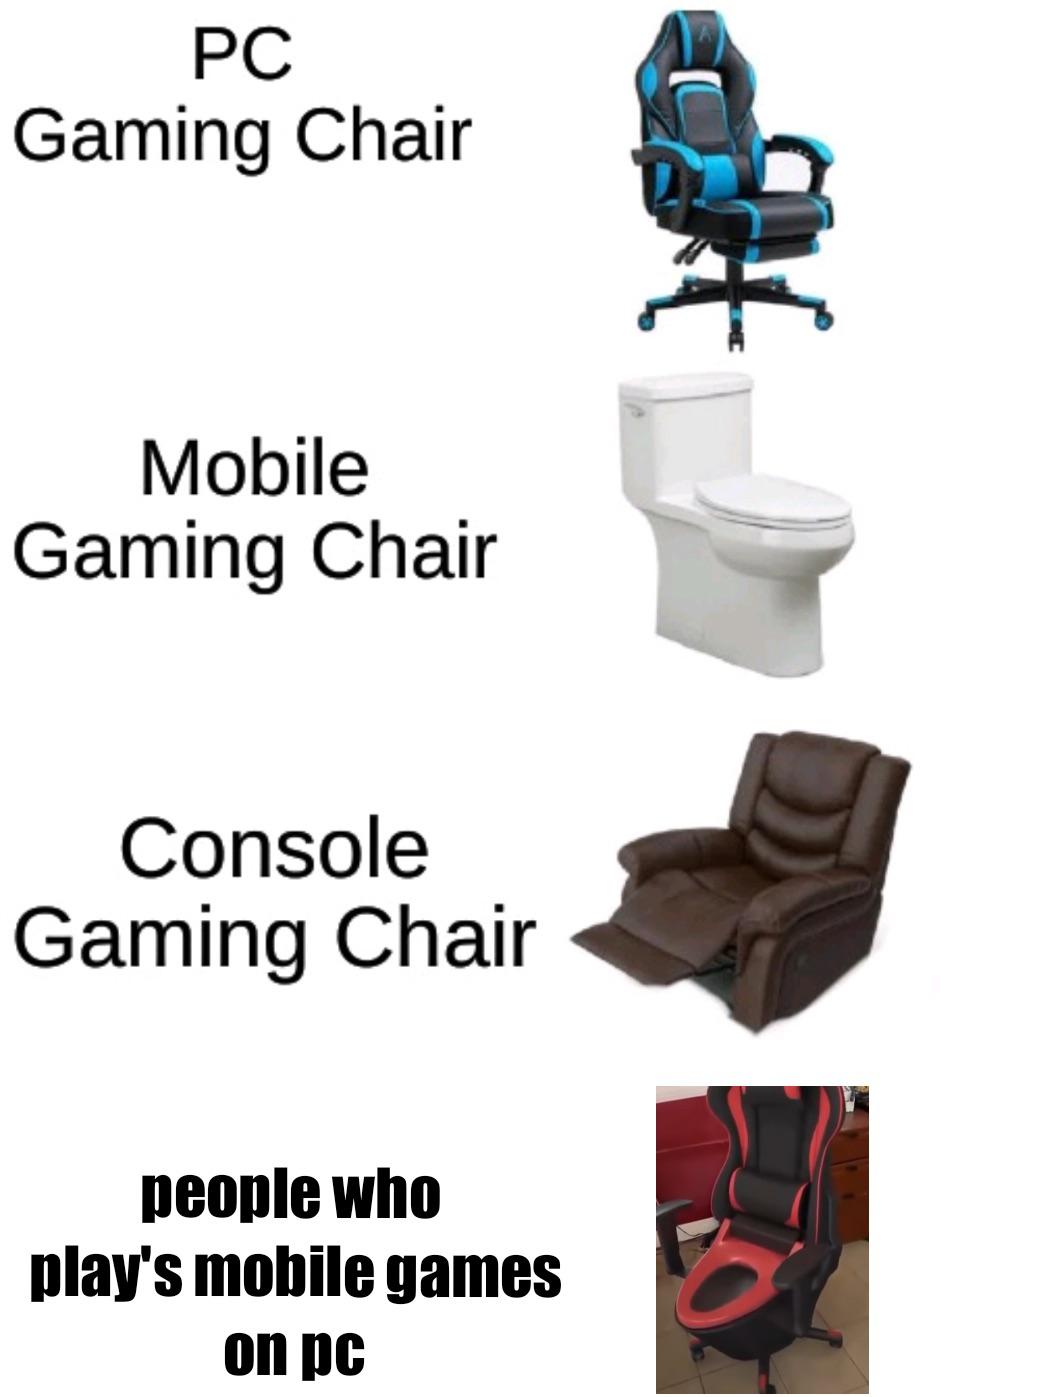 mobile gaming chair meme - Pc Gaming Chair Mobile Gaming Chair Console Gaming Chair people who play's mobile games o on pc